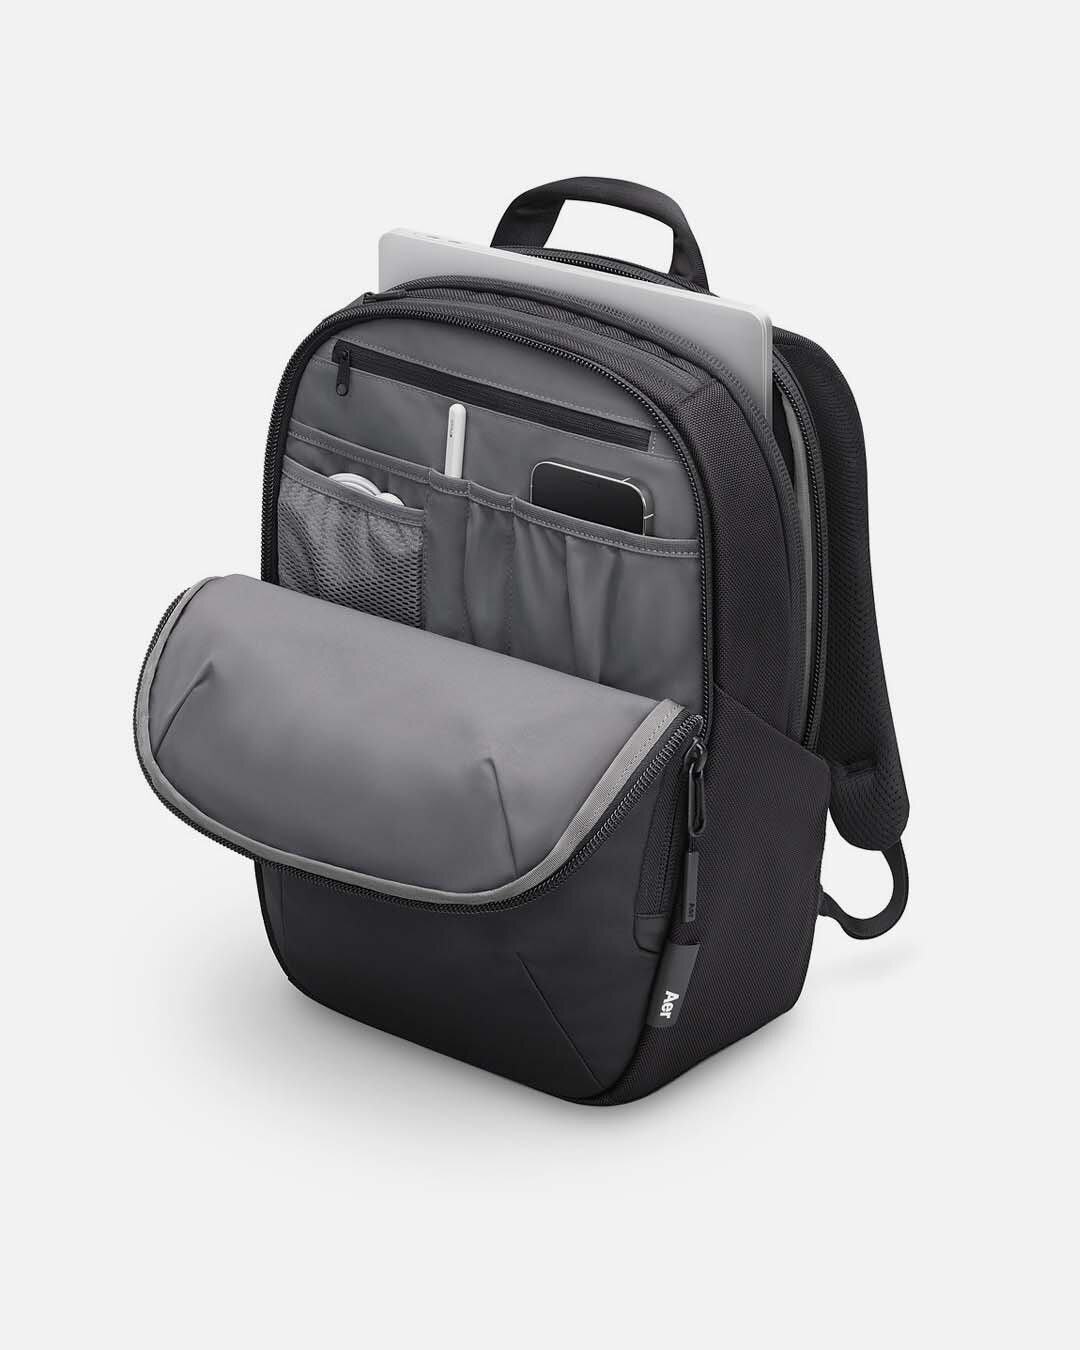 Borrowed except for Christianity Aer | Modern gym bags, best travel backpacks, and laptop work backpacks  designed for city travel